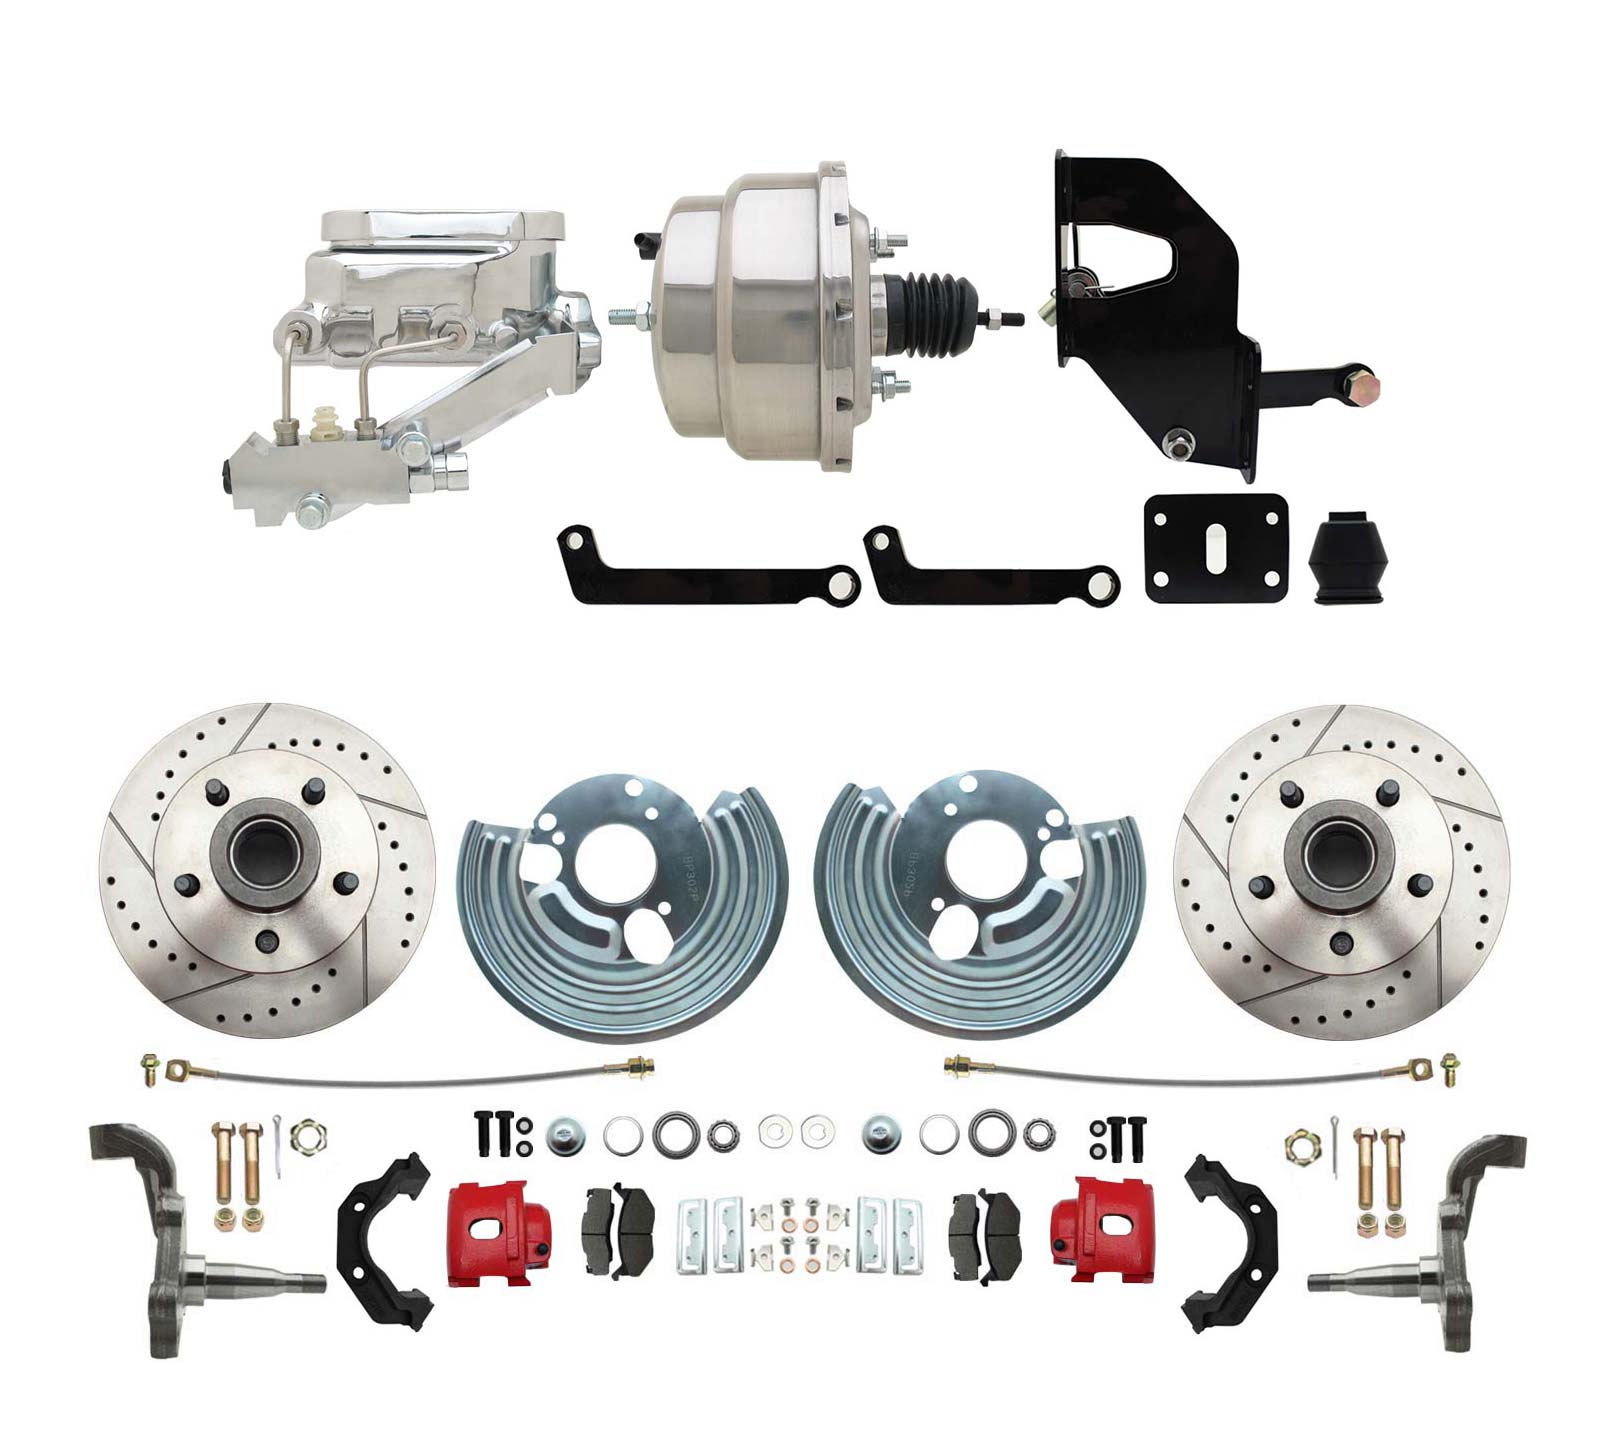 1962-72 Mopar B&E Body  Front Disc Brake Conversion Kit W/ Drilled & Slotted Rotors & Powder Coated Red Calipers ( Charger, Challenger, Coronet) W/ 8 Dual Chrome Booster Conversion Kit W/ Flat Top Chrome Master & Valve